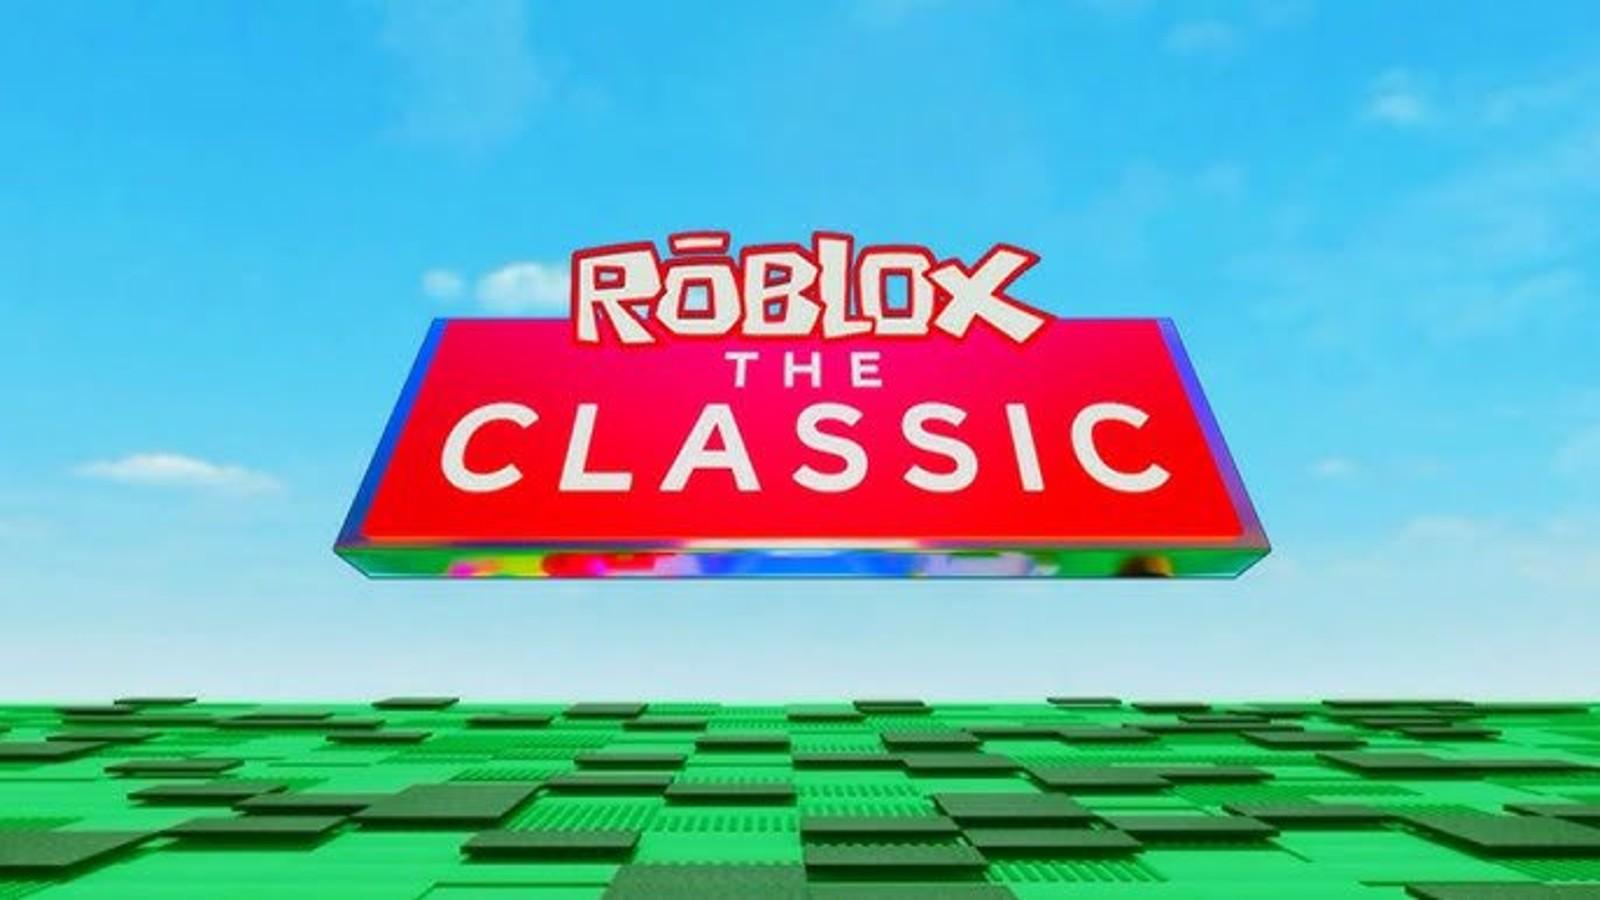 An image of the Roblox The Classic event logo.